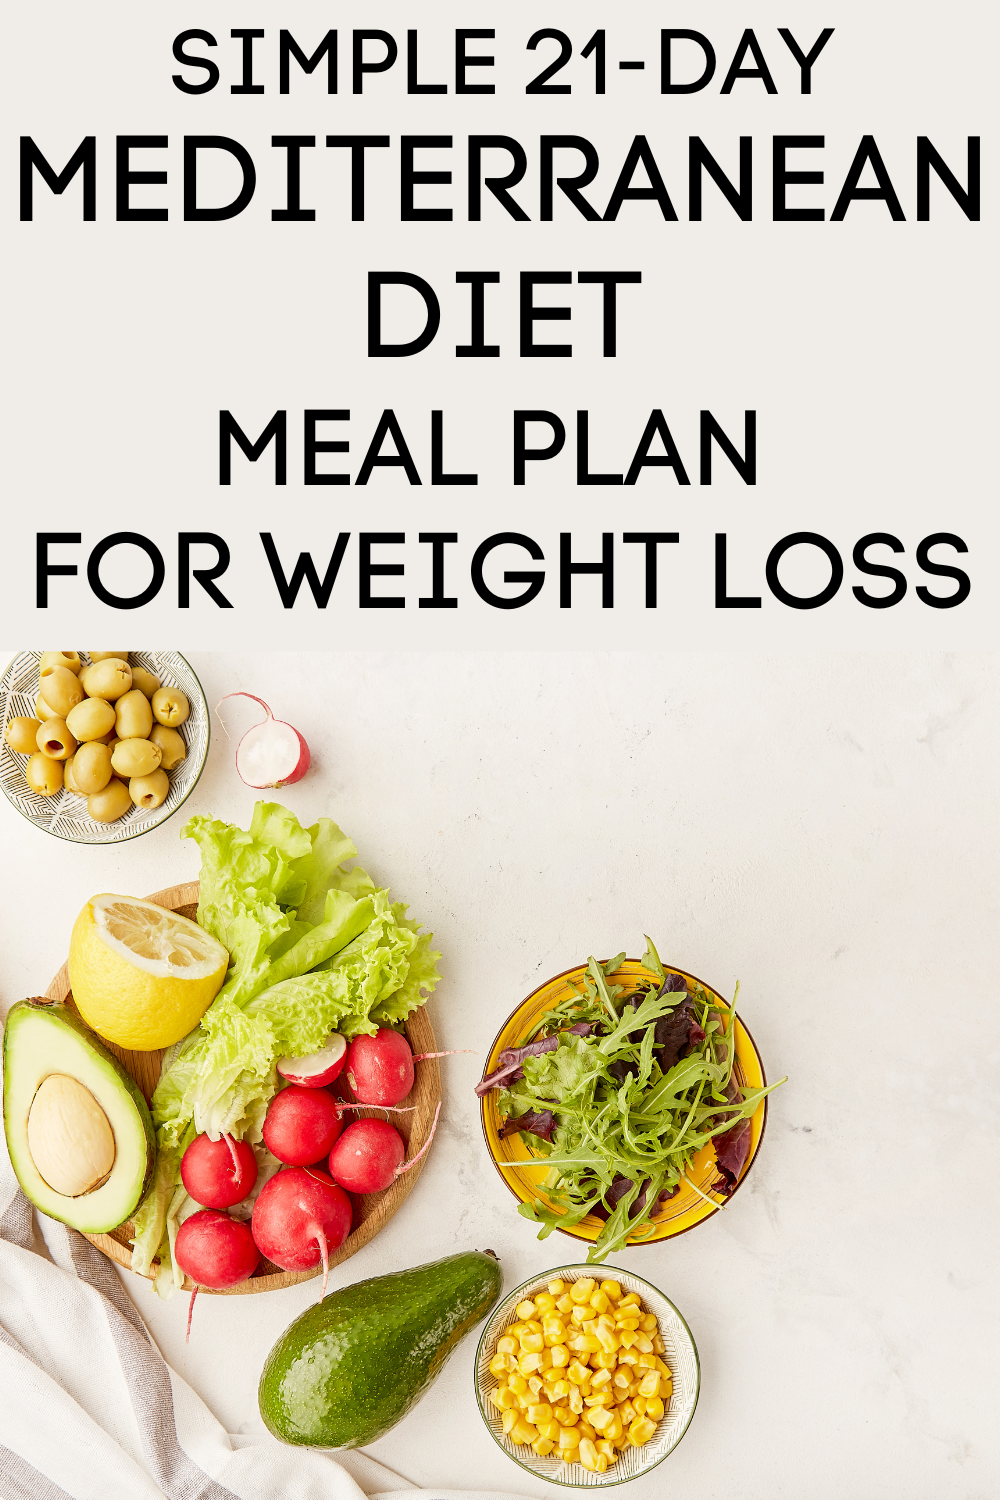 
SIMPLE 21-DAY MEDITERRANEAN DIET MEAL PLAN FOR WEIGHT LOSS